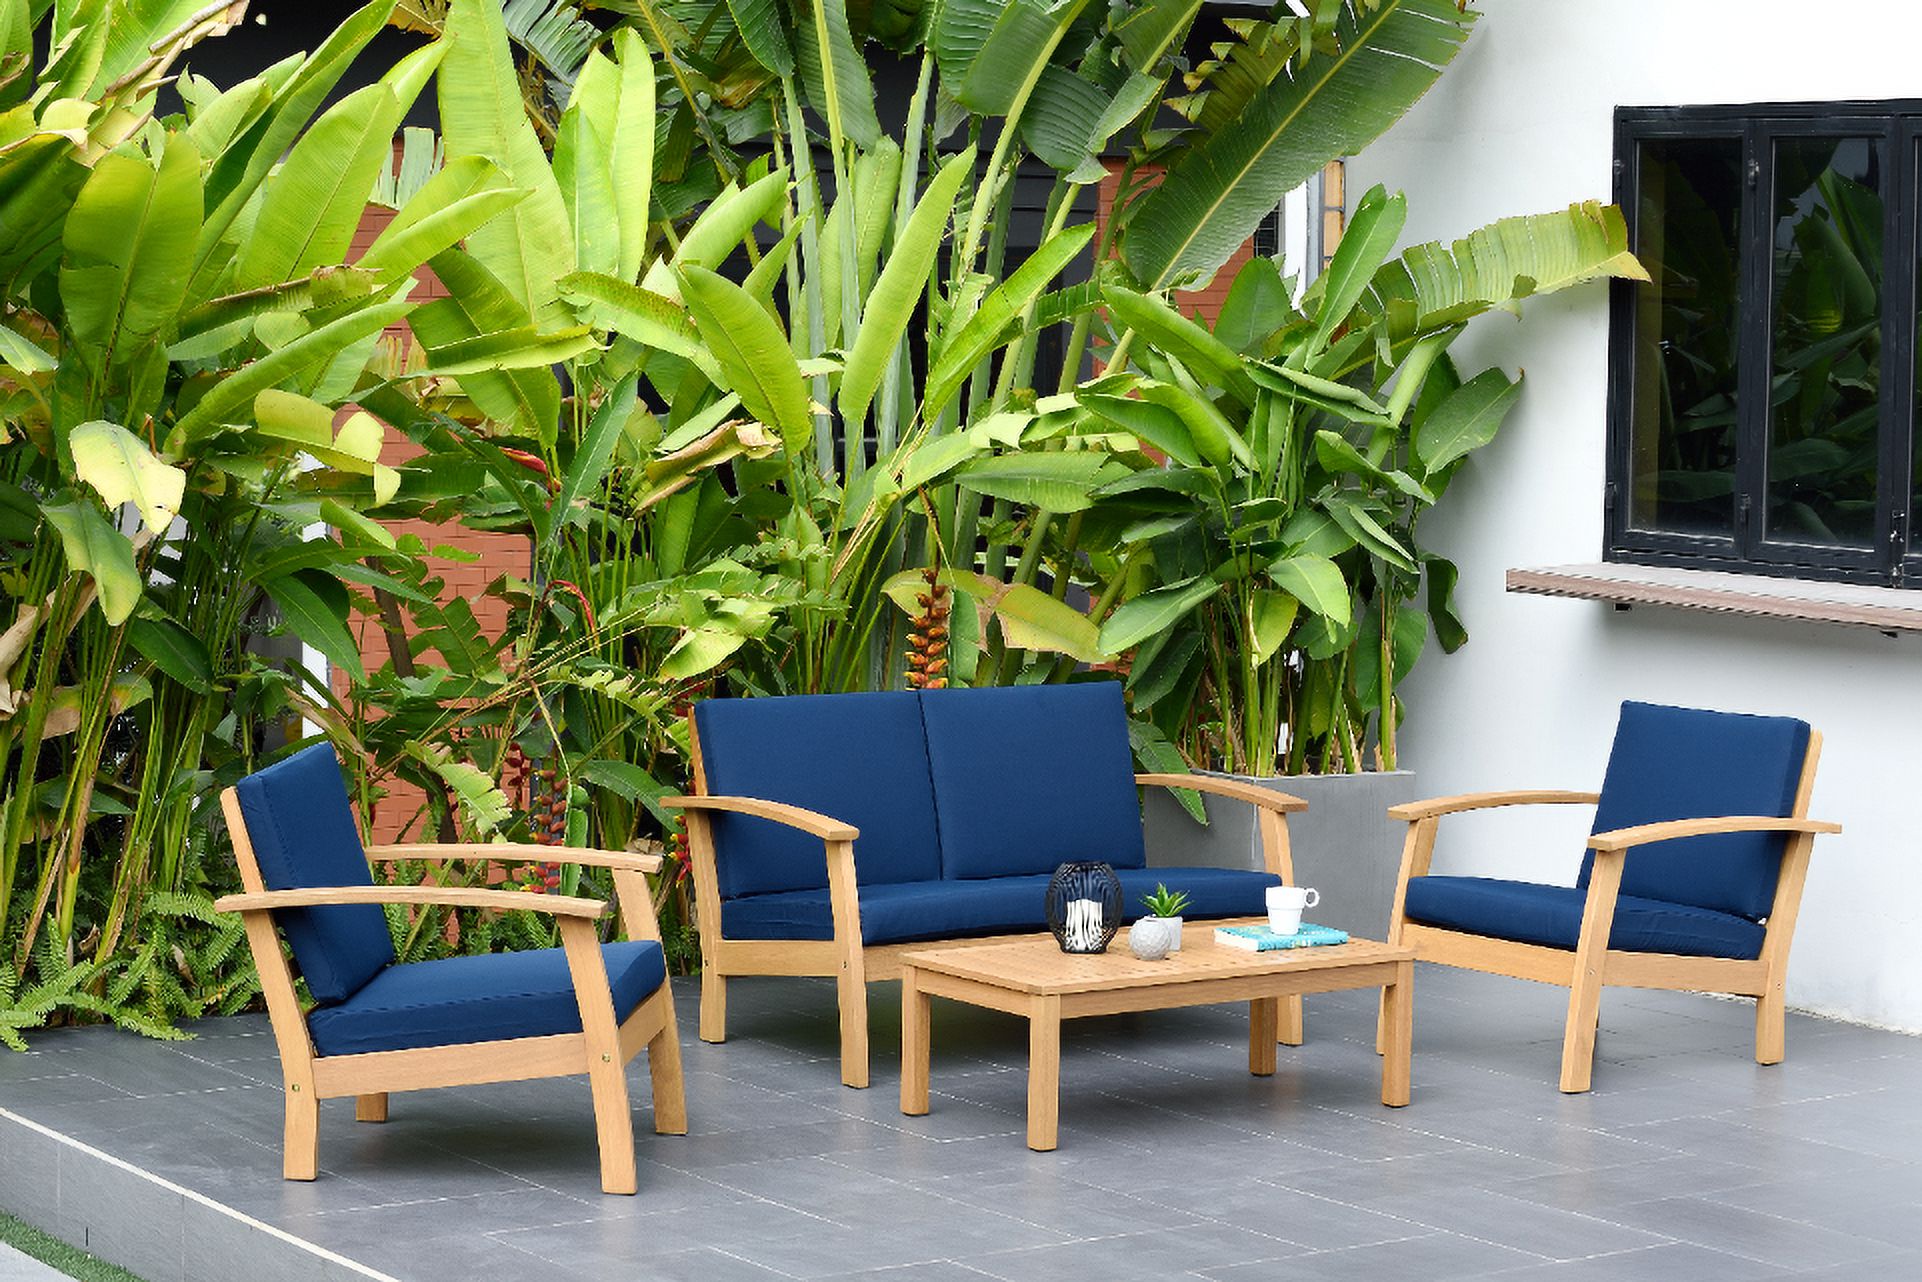 Amazonia Montein Teak Finish 4 Pieces Patio Conversation Set with Comfortable Cushions, Blue - image 1 of 10